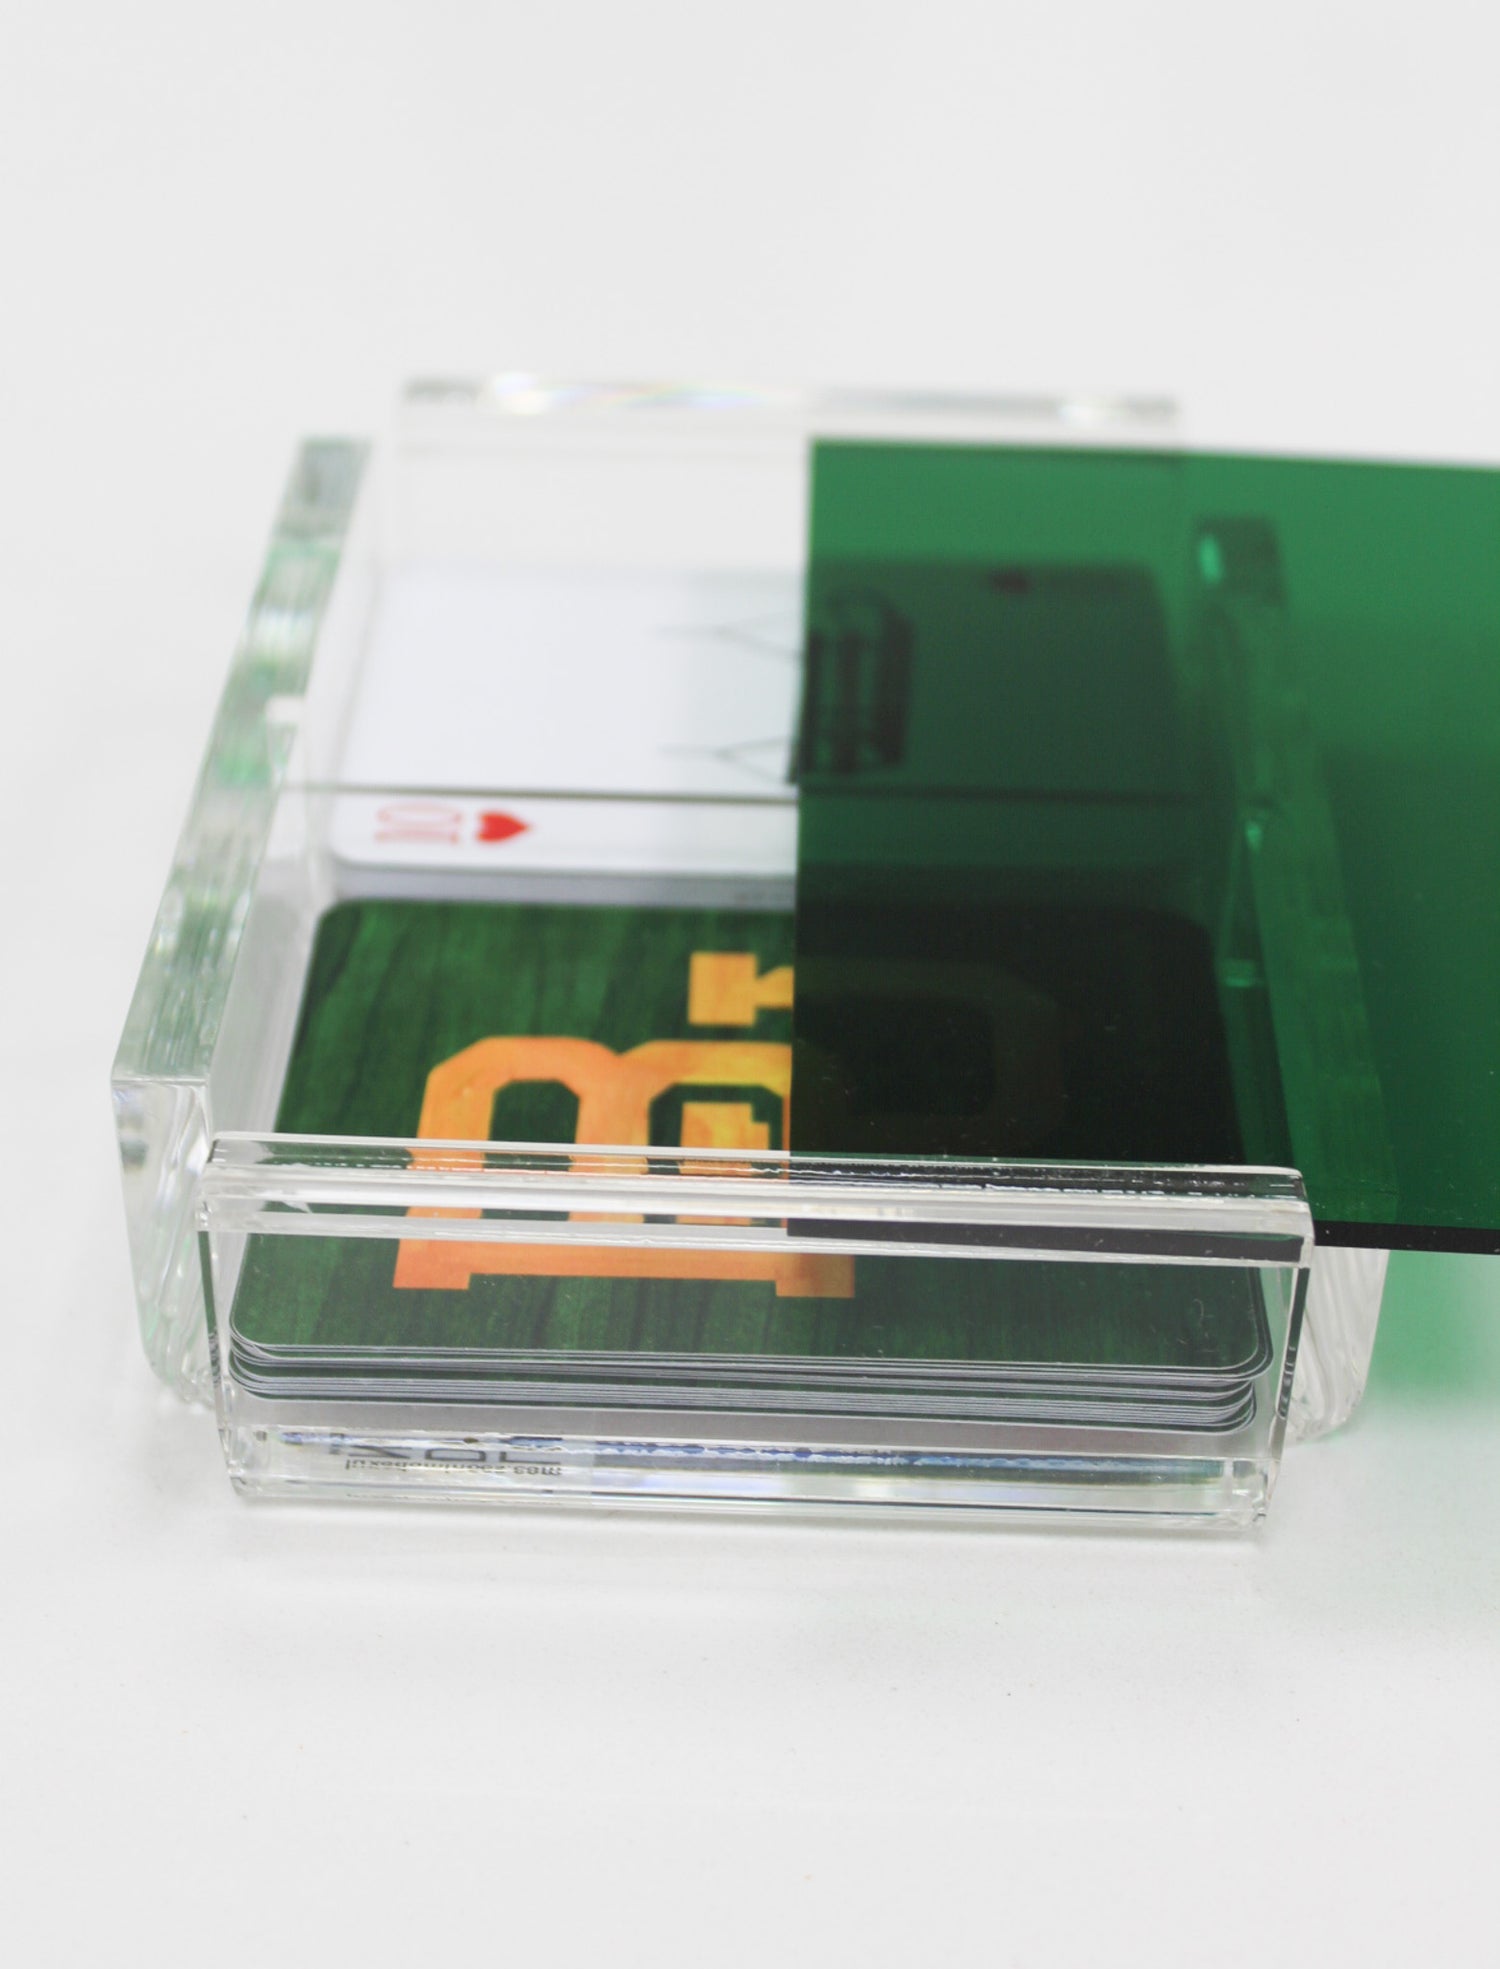 Baylor Playing Cards by FOSTER in a green acrylic playing card case